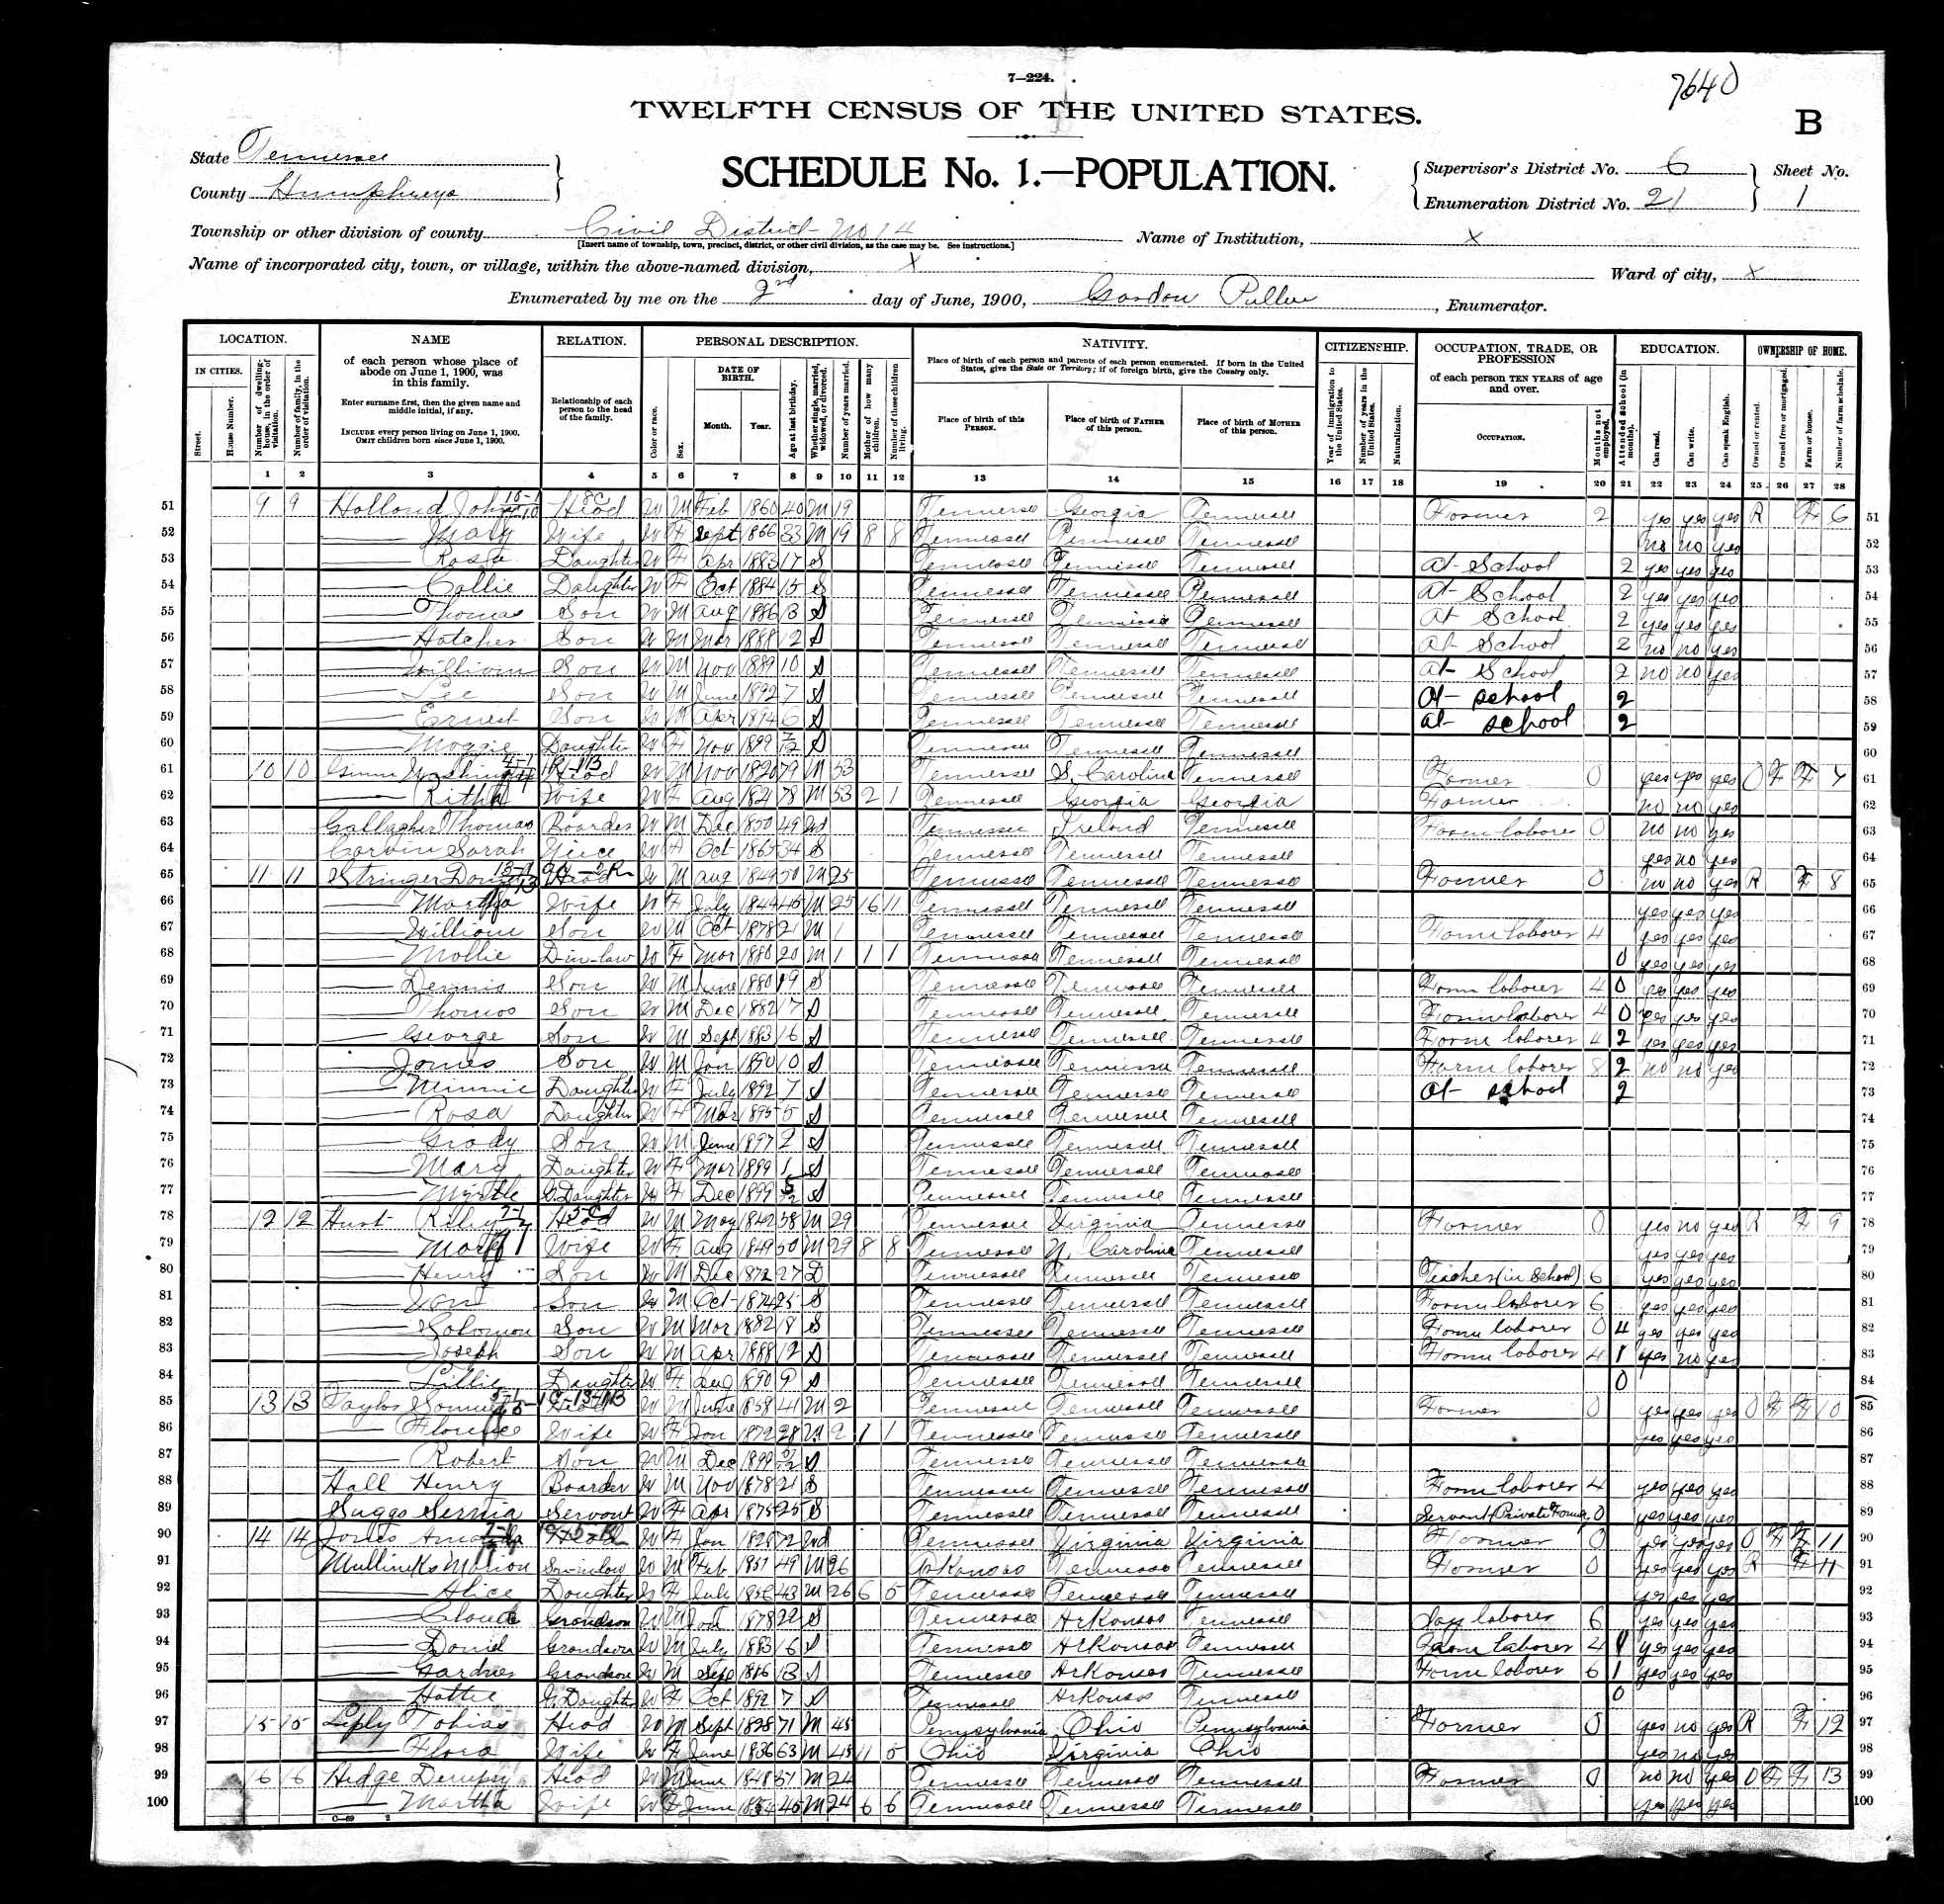 George W. Gunn and wife Retha Brazzell, 1900 Humphreys County, Tennessee, census